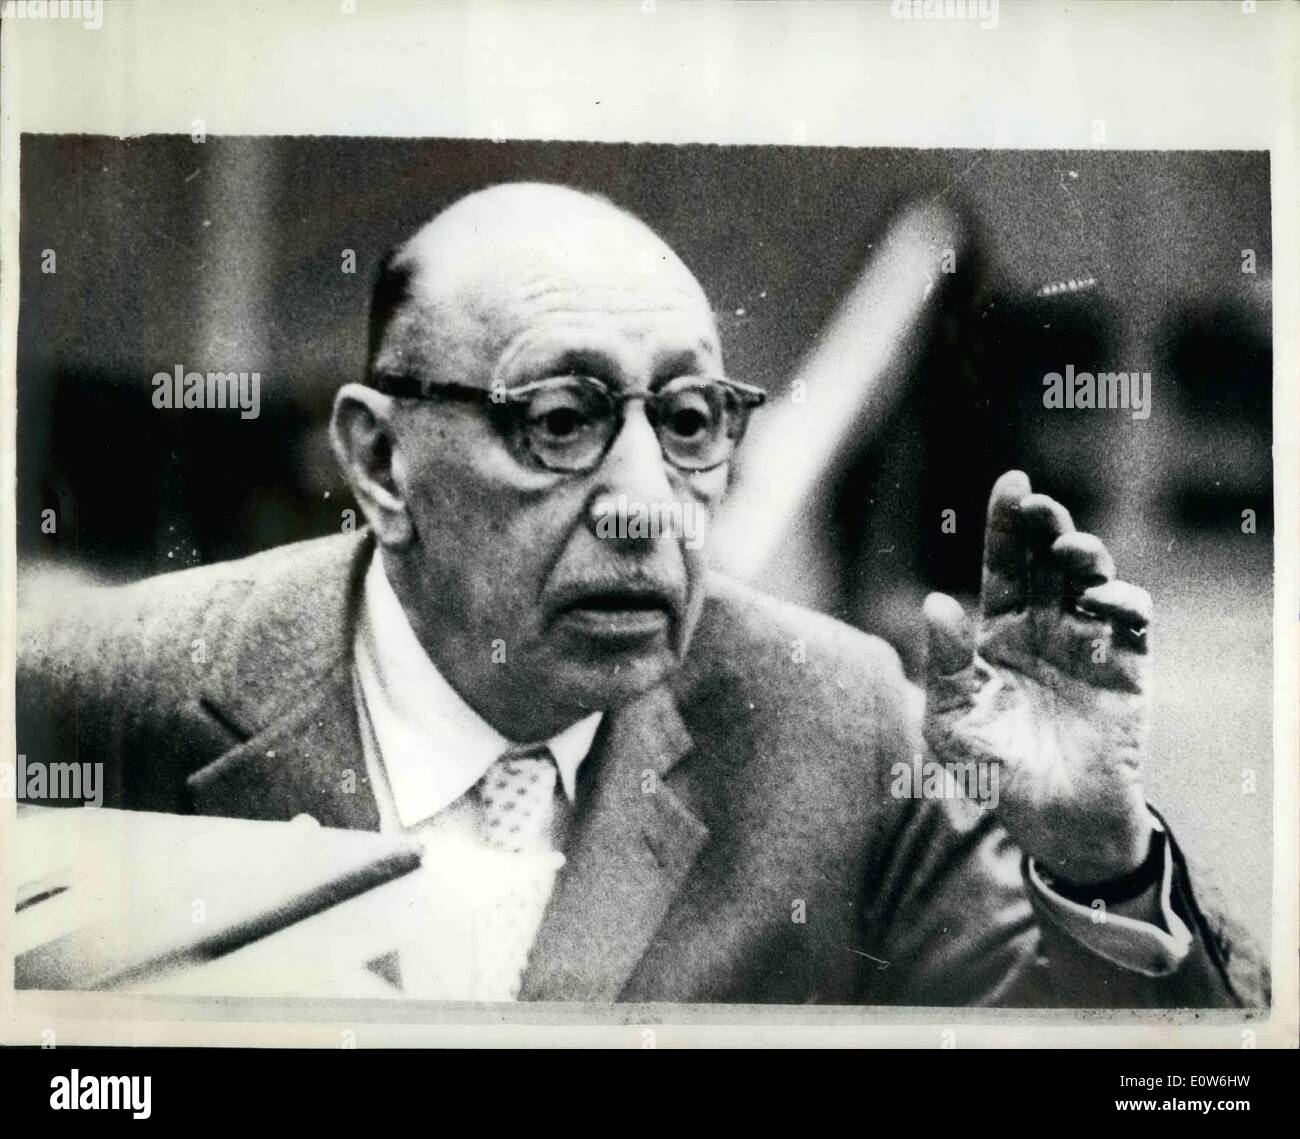 Oct. 10, 1961 - The Man with an Ear for Music - Igor Stravinsky Rehearses the B.B.C. Symphony Orchestra. The world's greatest living composer, 79-year-old Igor Stravinsky, the man who in 50 years has heard his music dismissed and condemned, accepted and acclaimed, was busy yesterday listening critically to a rehearsal by the B.B.C. Symphony Orchestra. The Festival Hall will be packed with celebrities for the Master's concert on Sunday. Photo Shows The wise, wrinkled face of the master - Igor Stravinsky listens to the B.B.C. Symphony Orchestra during the rehearsal yesterday. Stock Photo